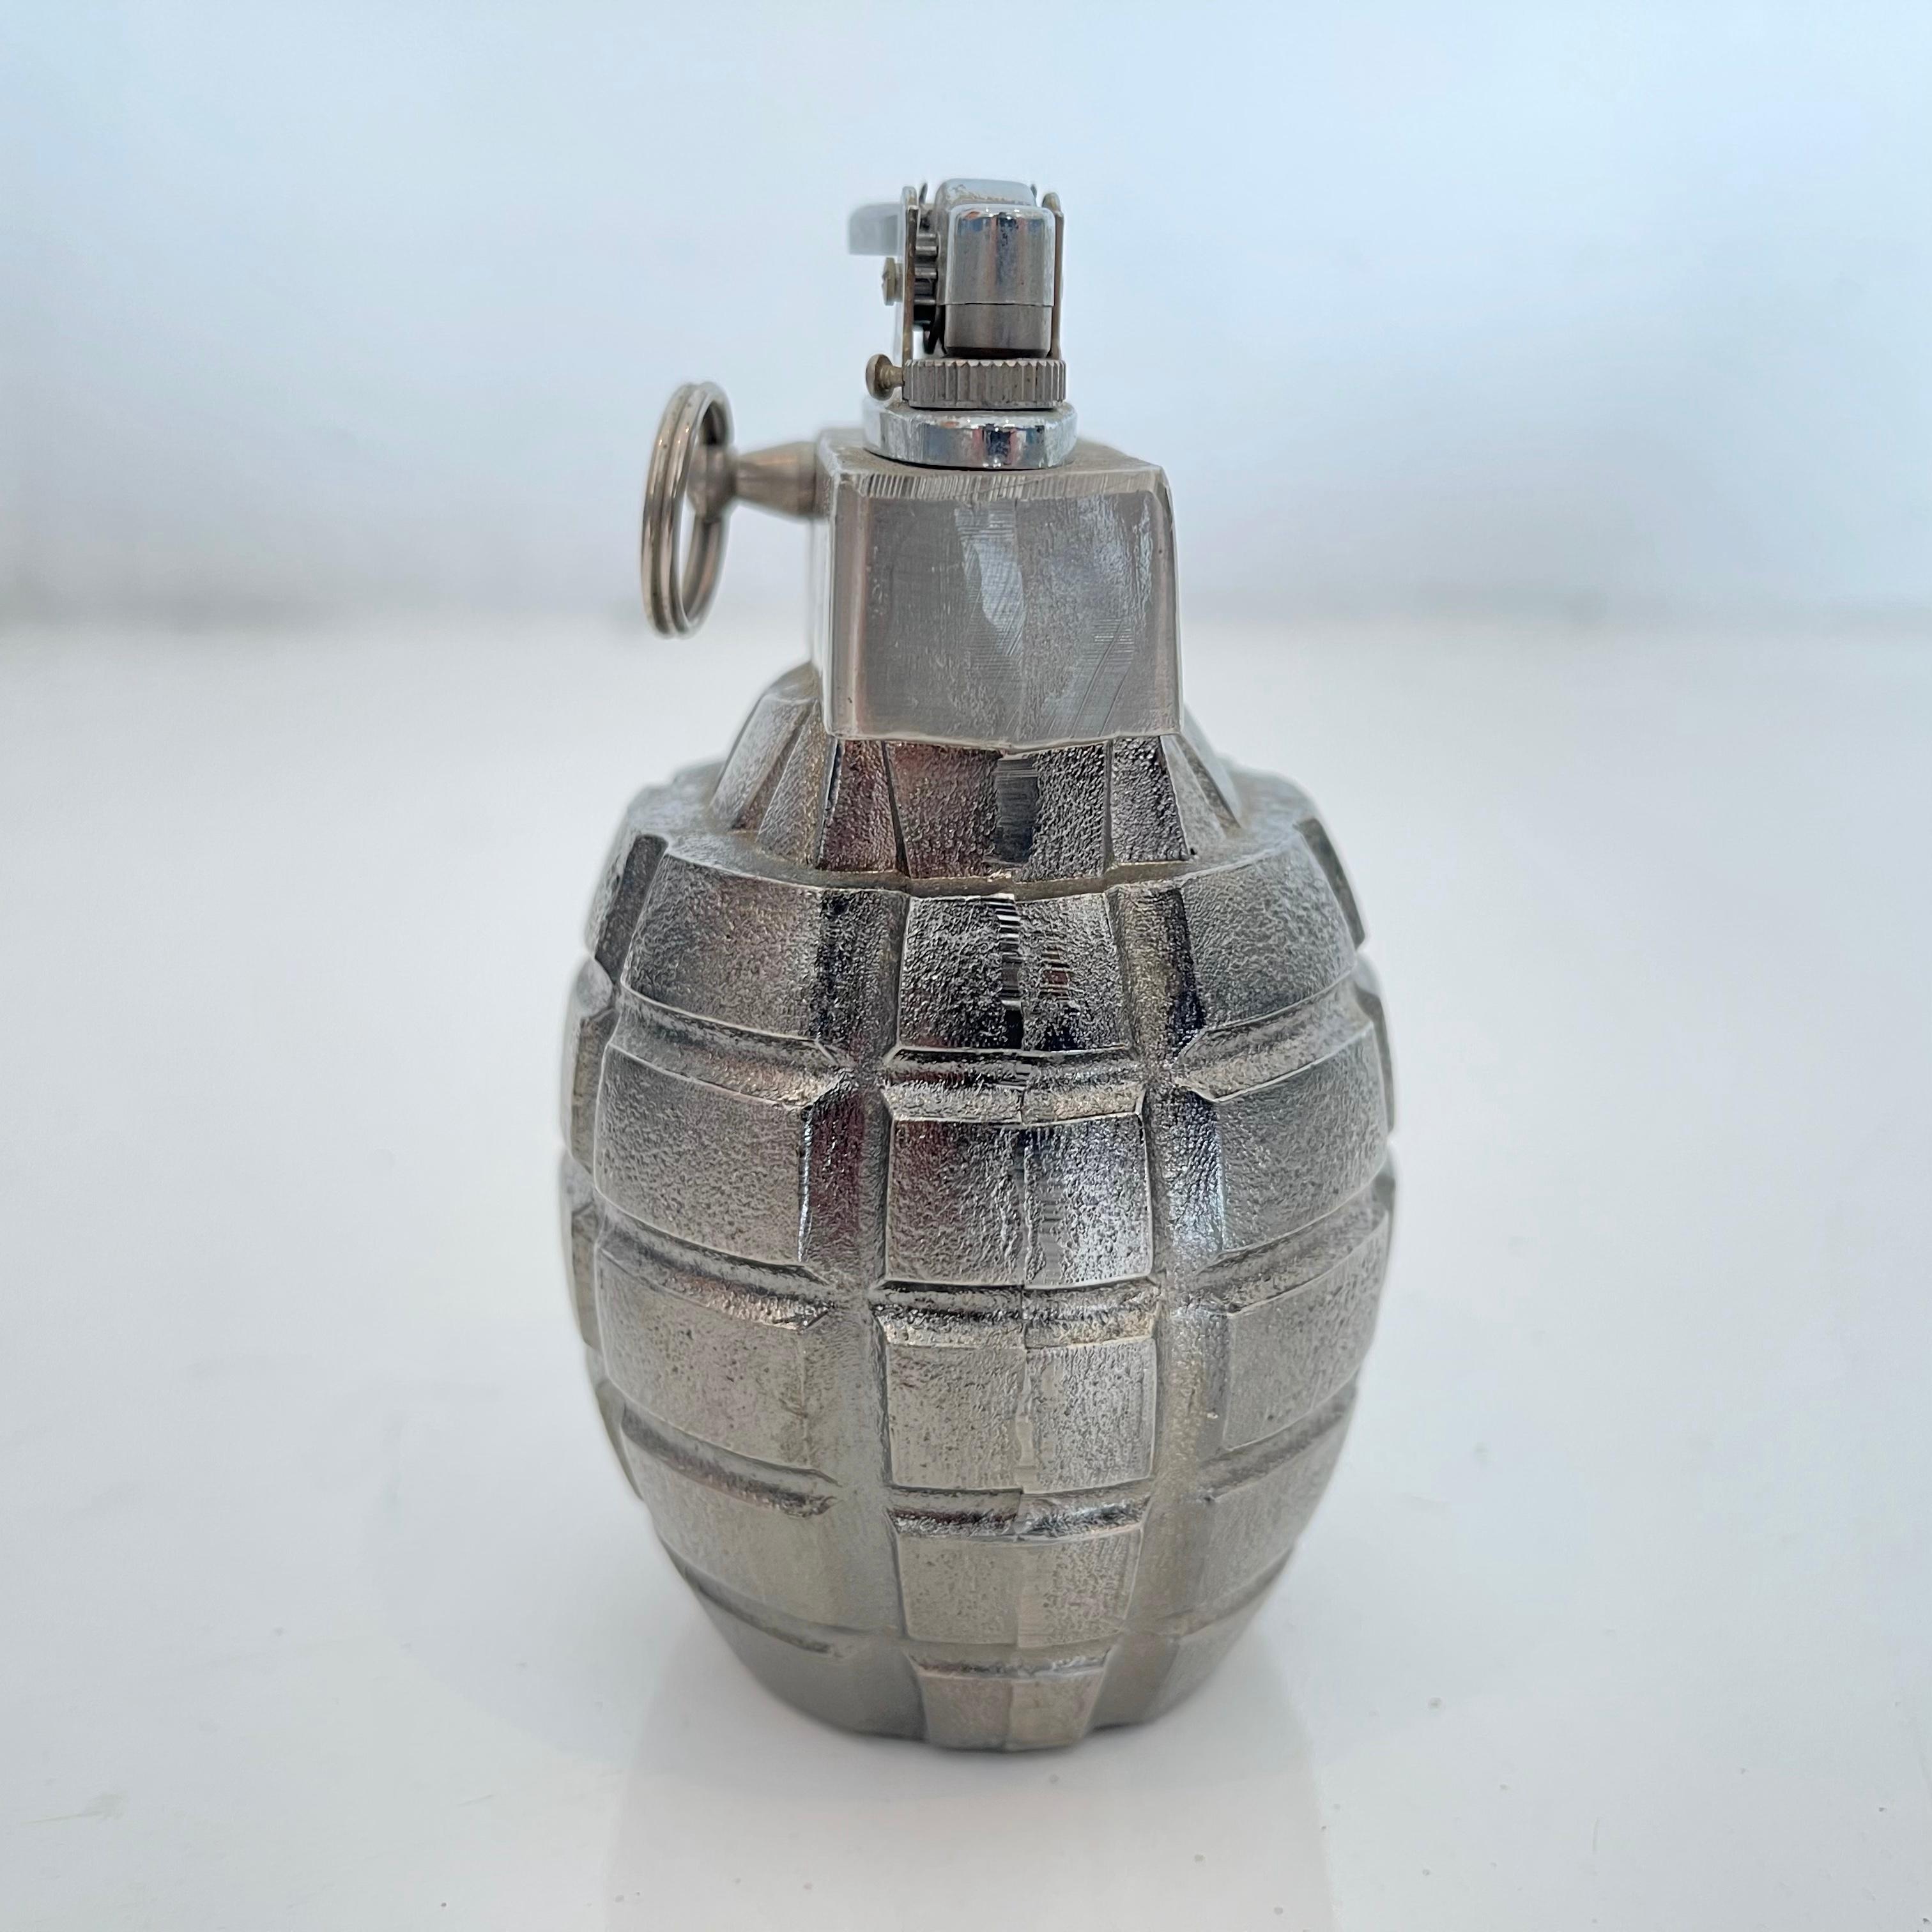 Unique vintage table lighter in the shape of a grenade. Made in Japan with 